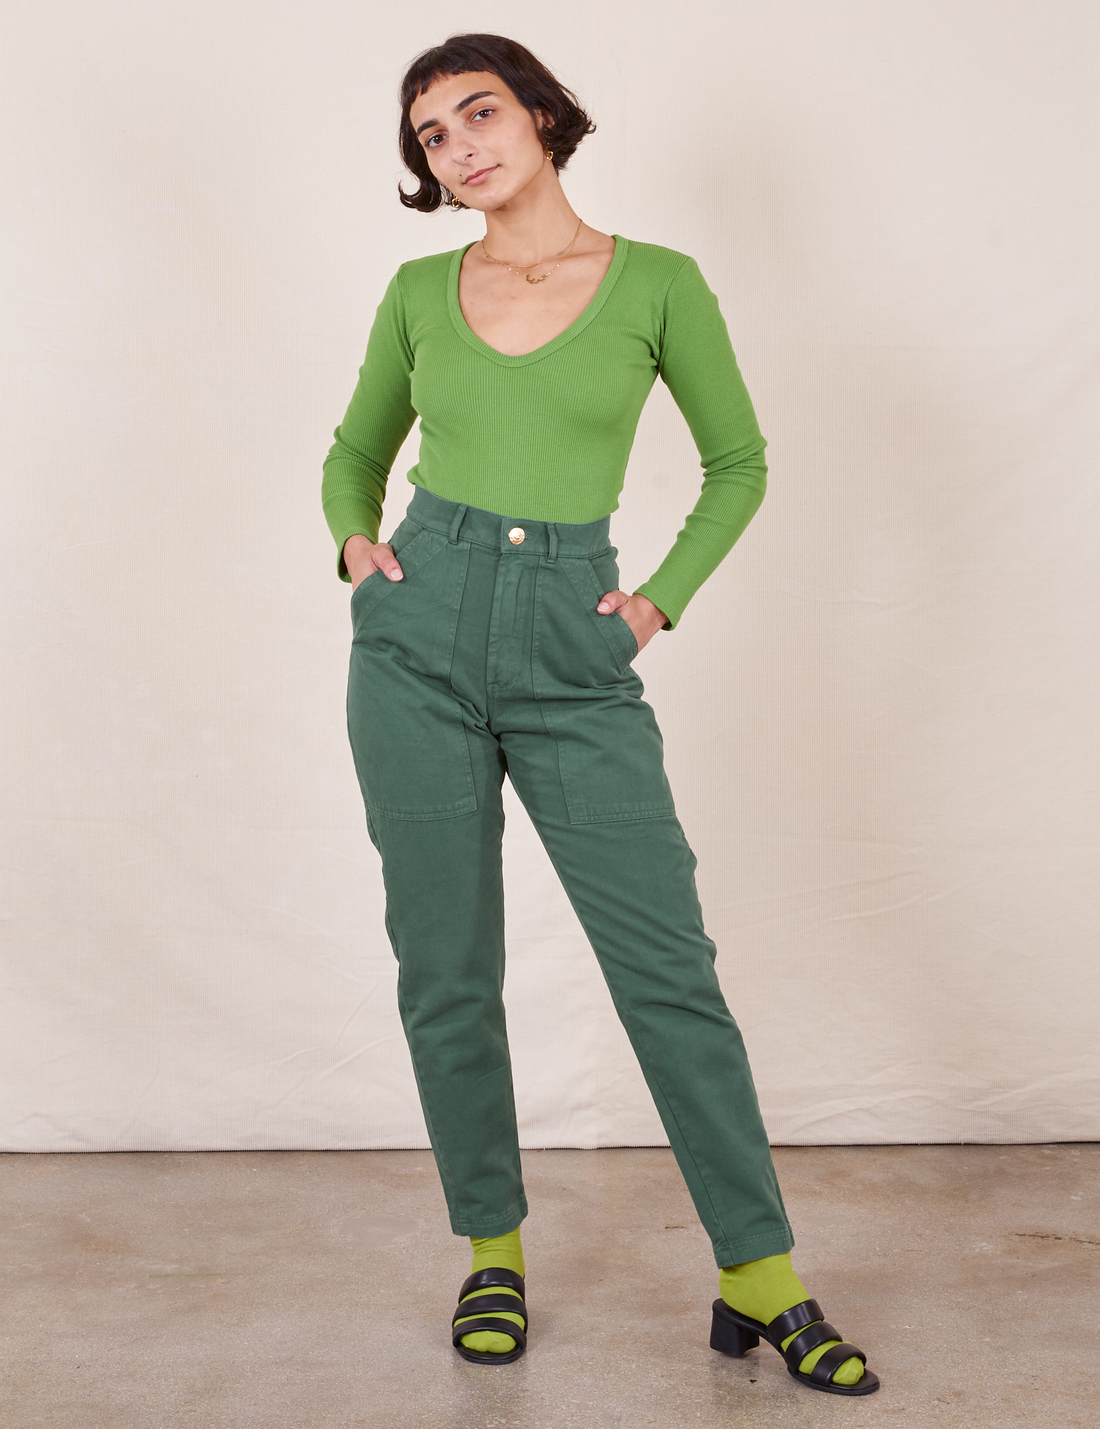 Soraya is 5'2" and wearing XXS Petite Pencil Pants in Dark Emerald Green paired with bright olive Long Sleeve V-Neck Tee